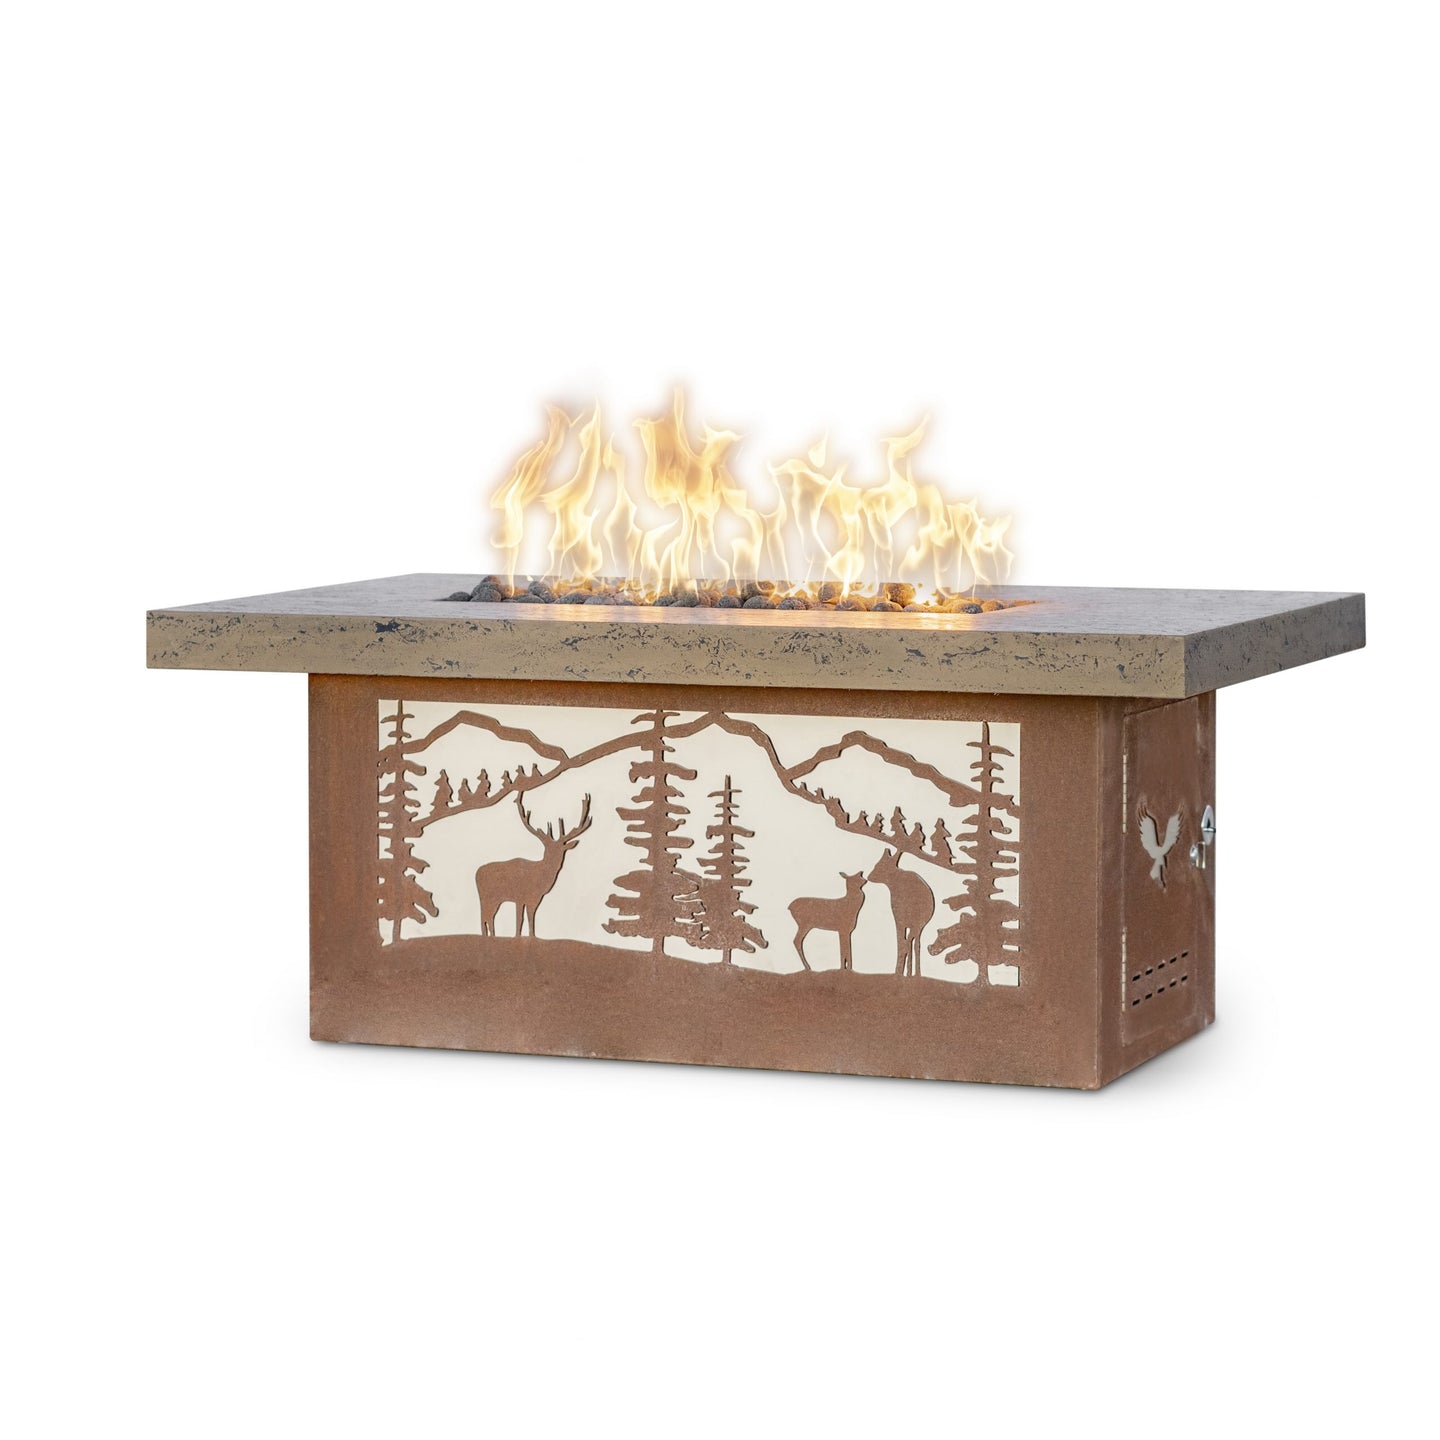 The Outdoor Plus Rectangle Outback Fire Pit / Deer County Design + Free Cover